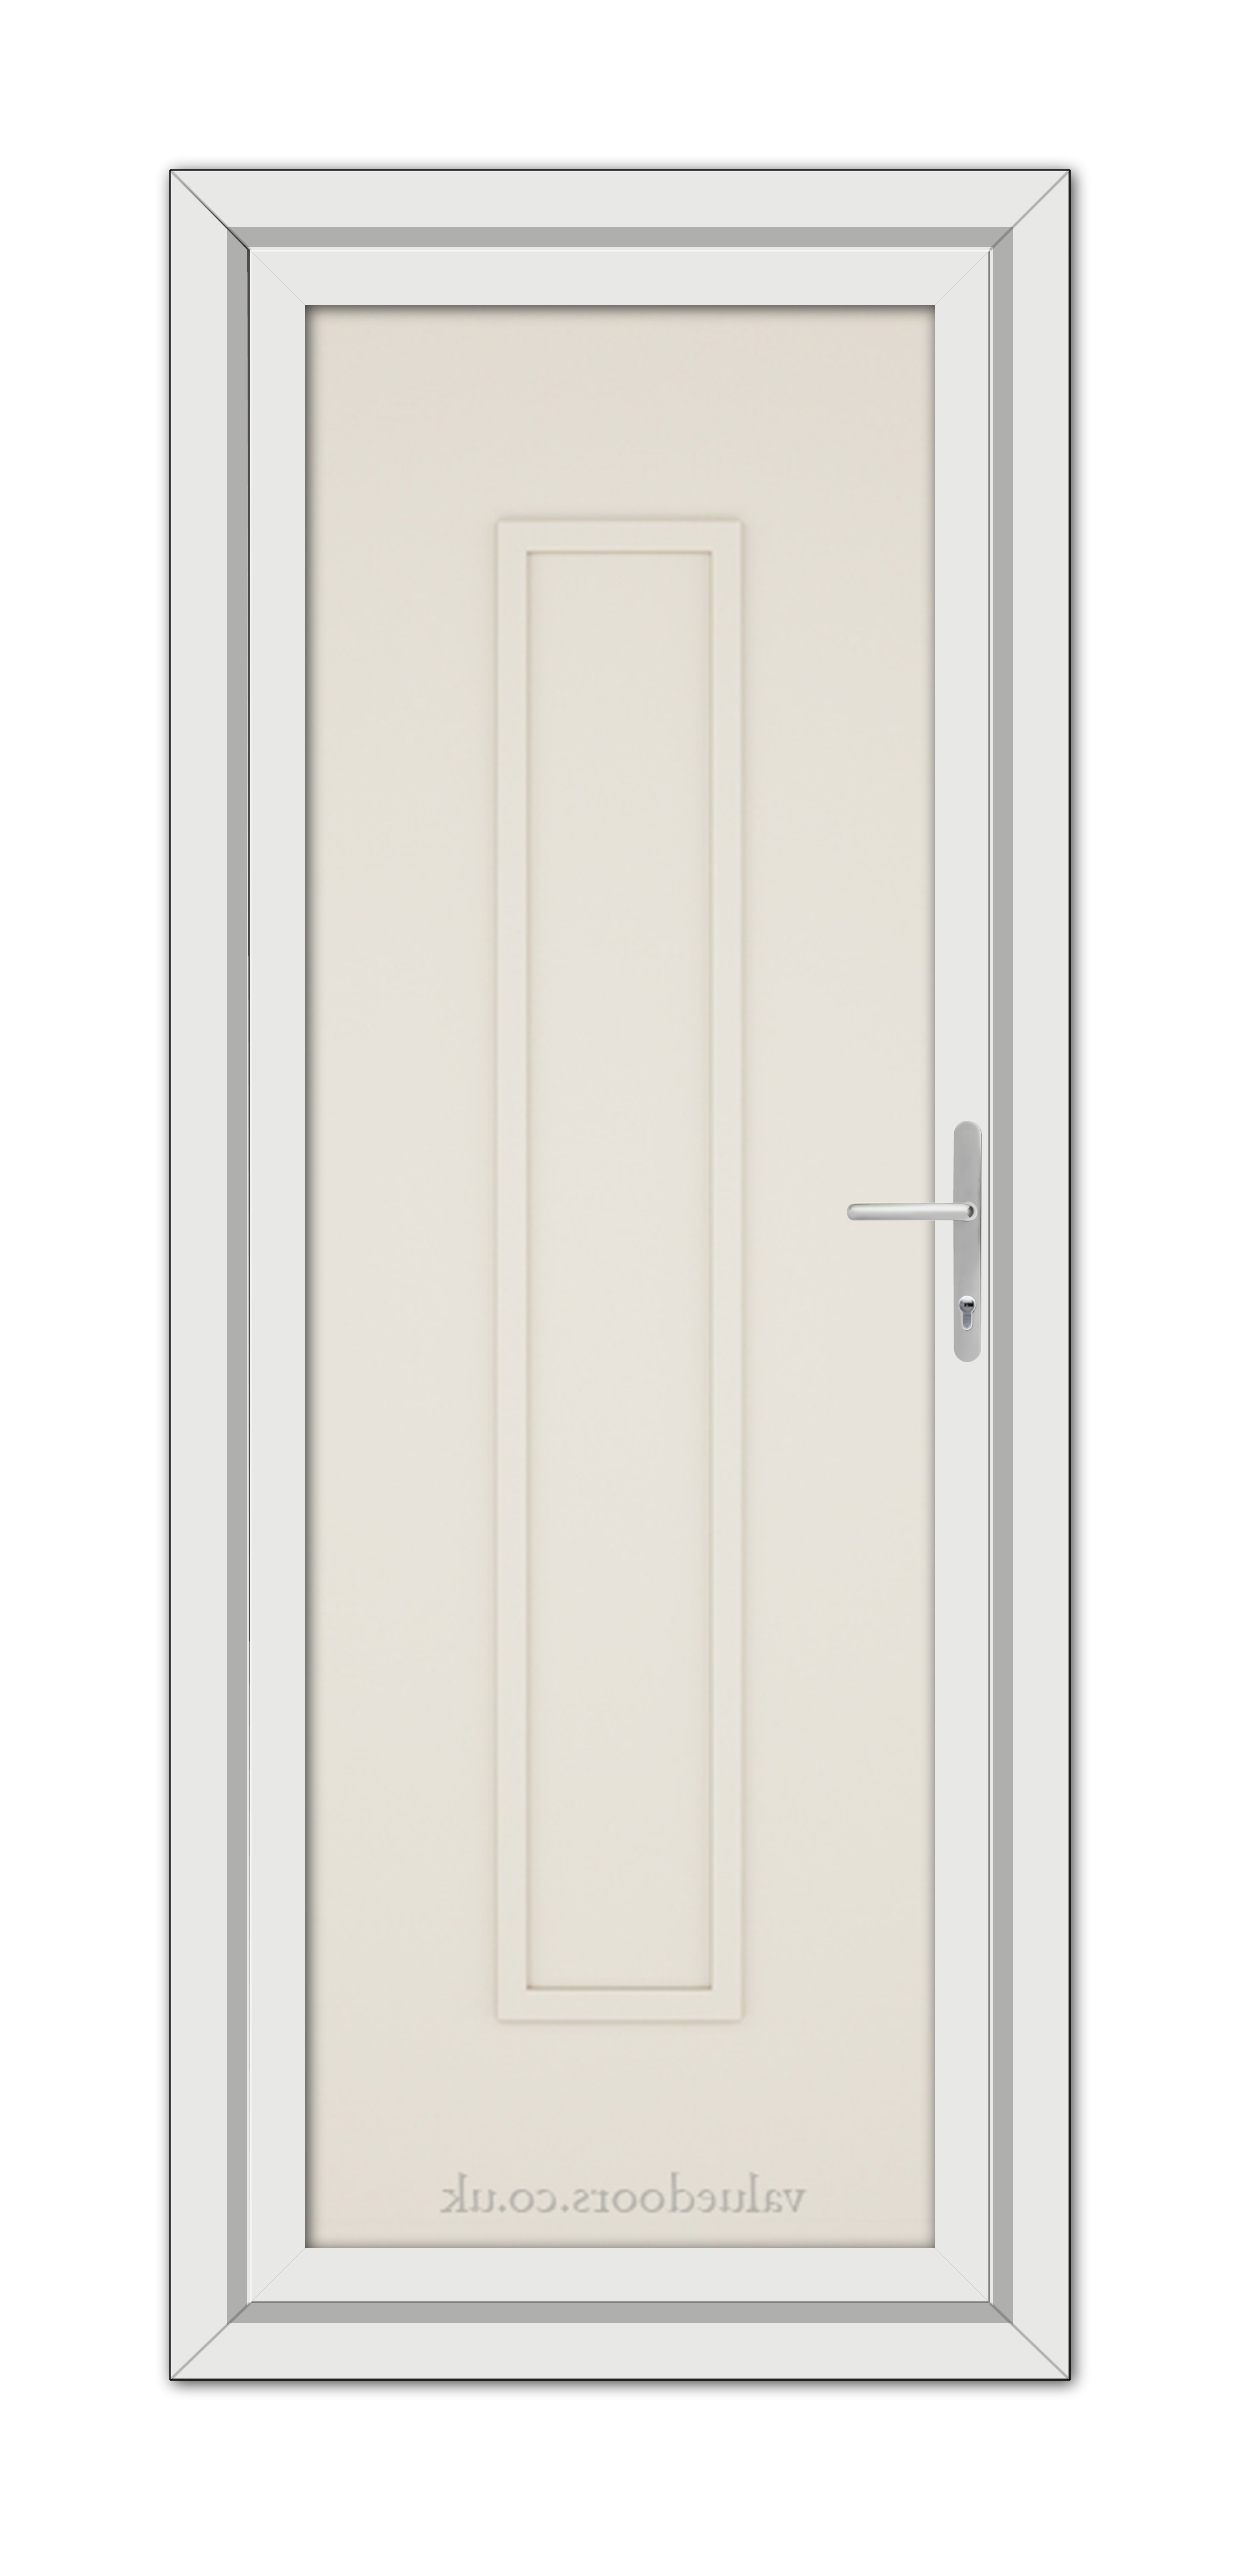 A vertical image of a closed, Cream Modern 5101 Solid uPVC Door with a silver handle, set within a white door frame. the door features a subtle rectangular design.